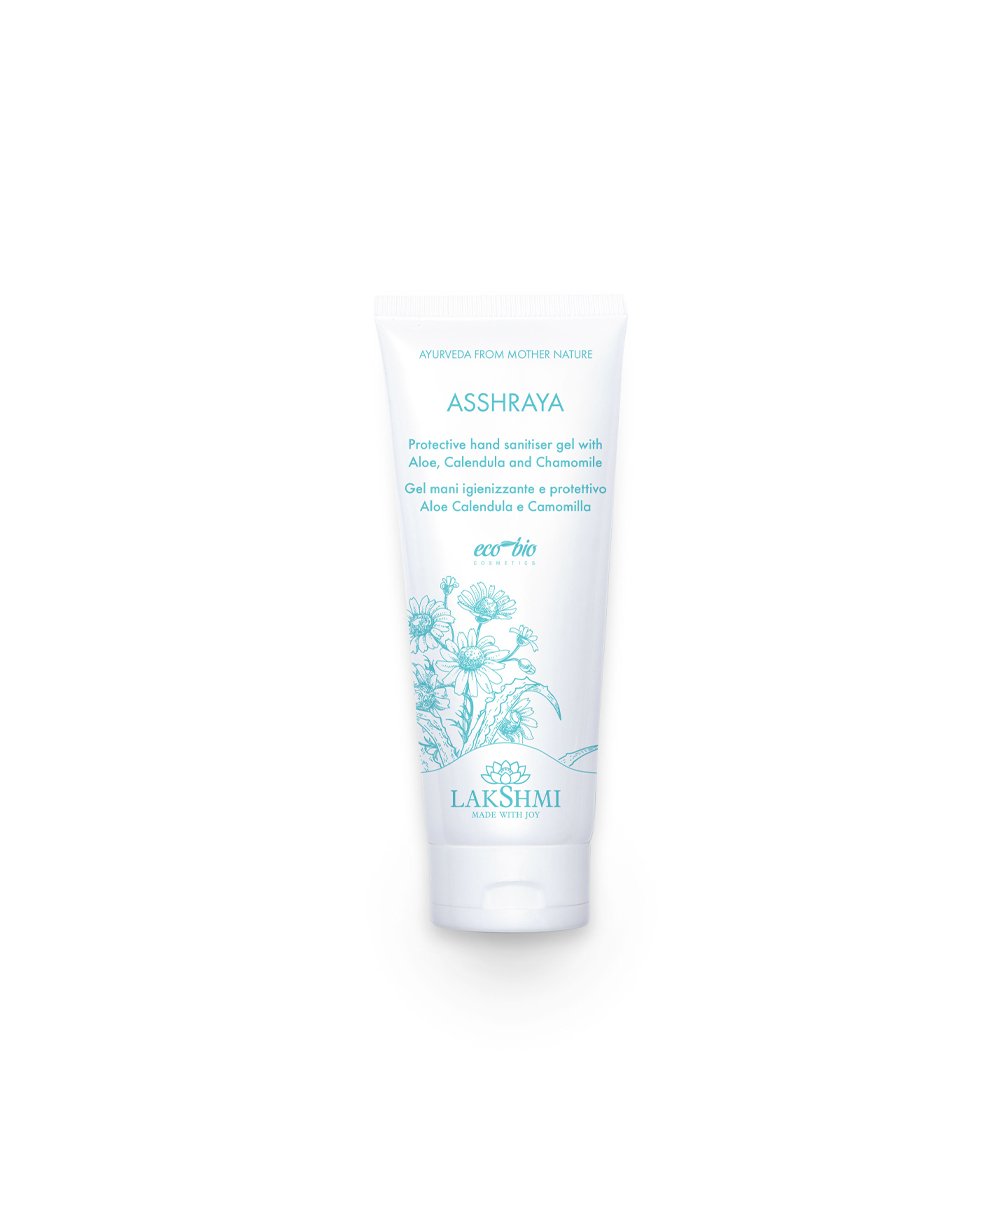 Sanitizing and protective gel with aloe and chamomile